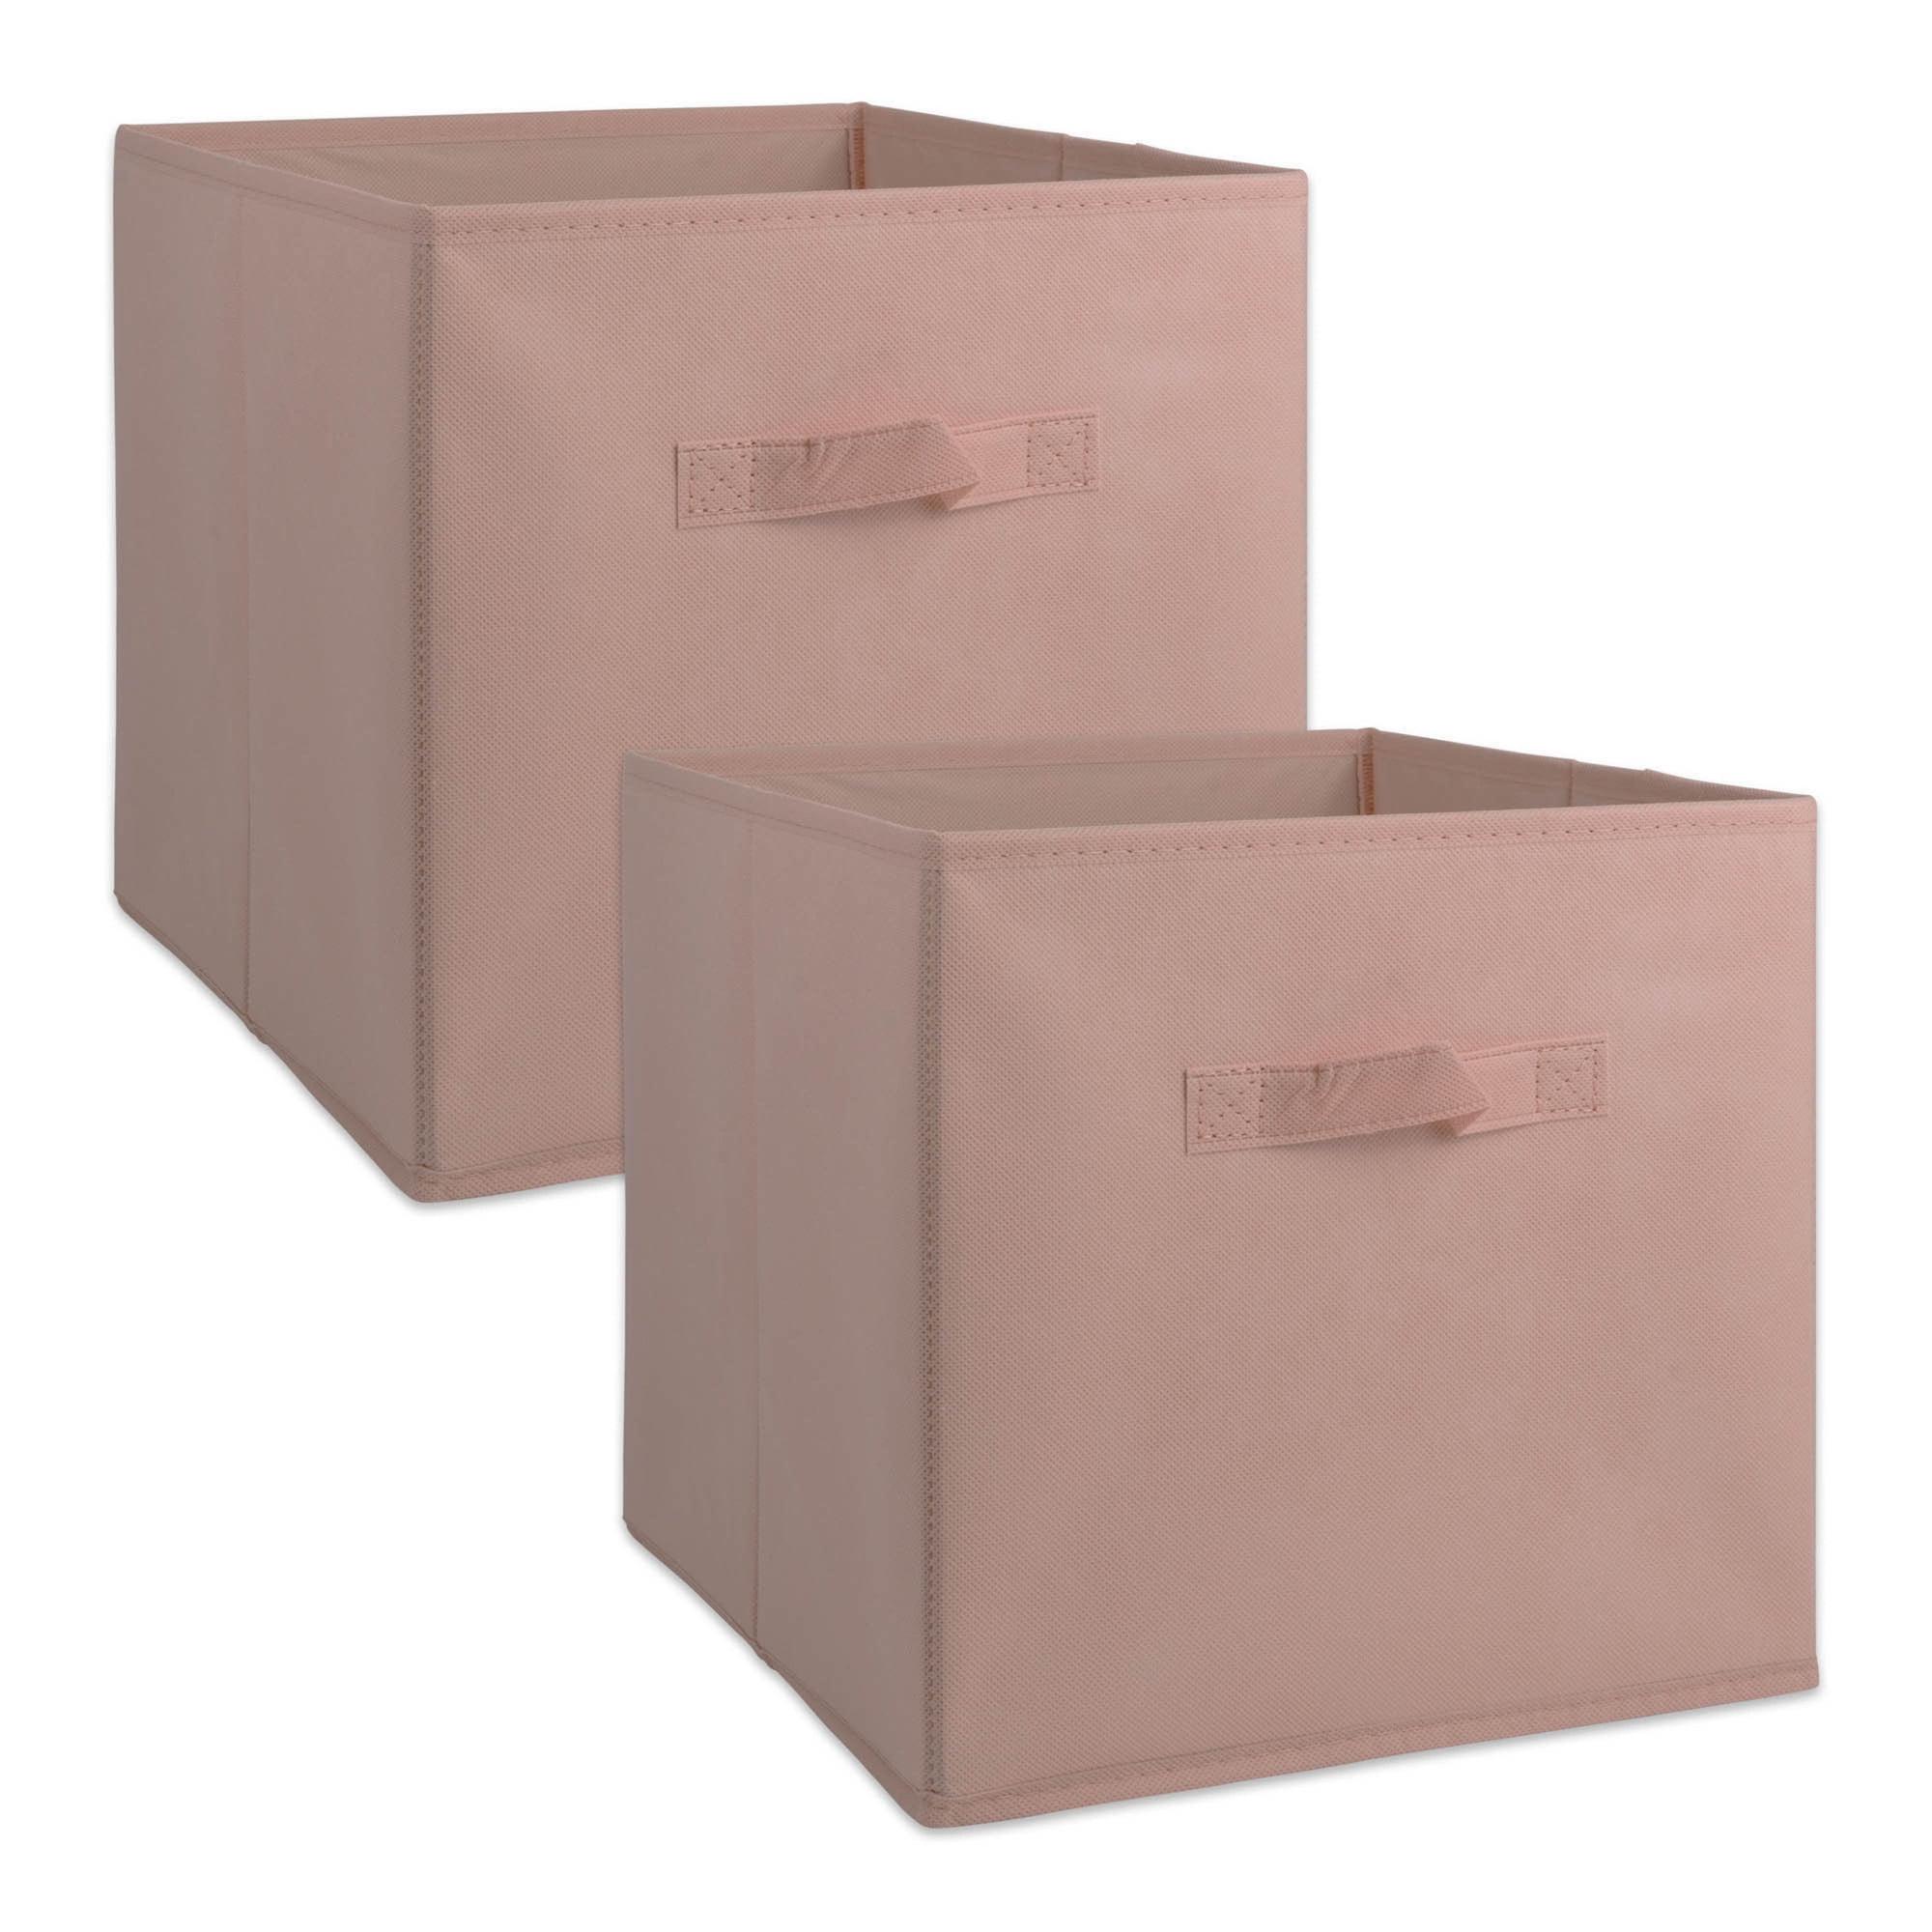 Vibrant Pink Collapsible Cube Storage Bins for Kids 13"